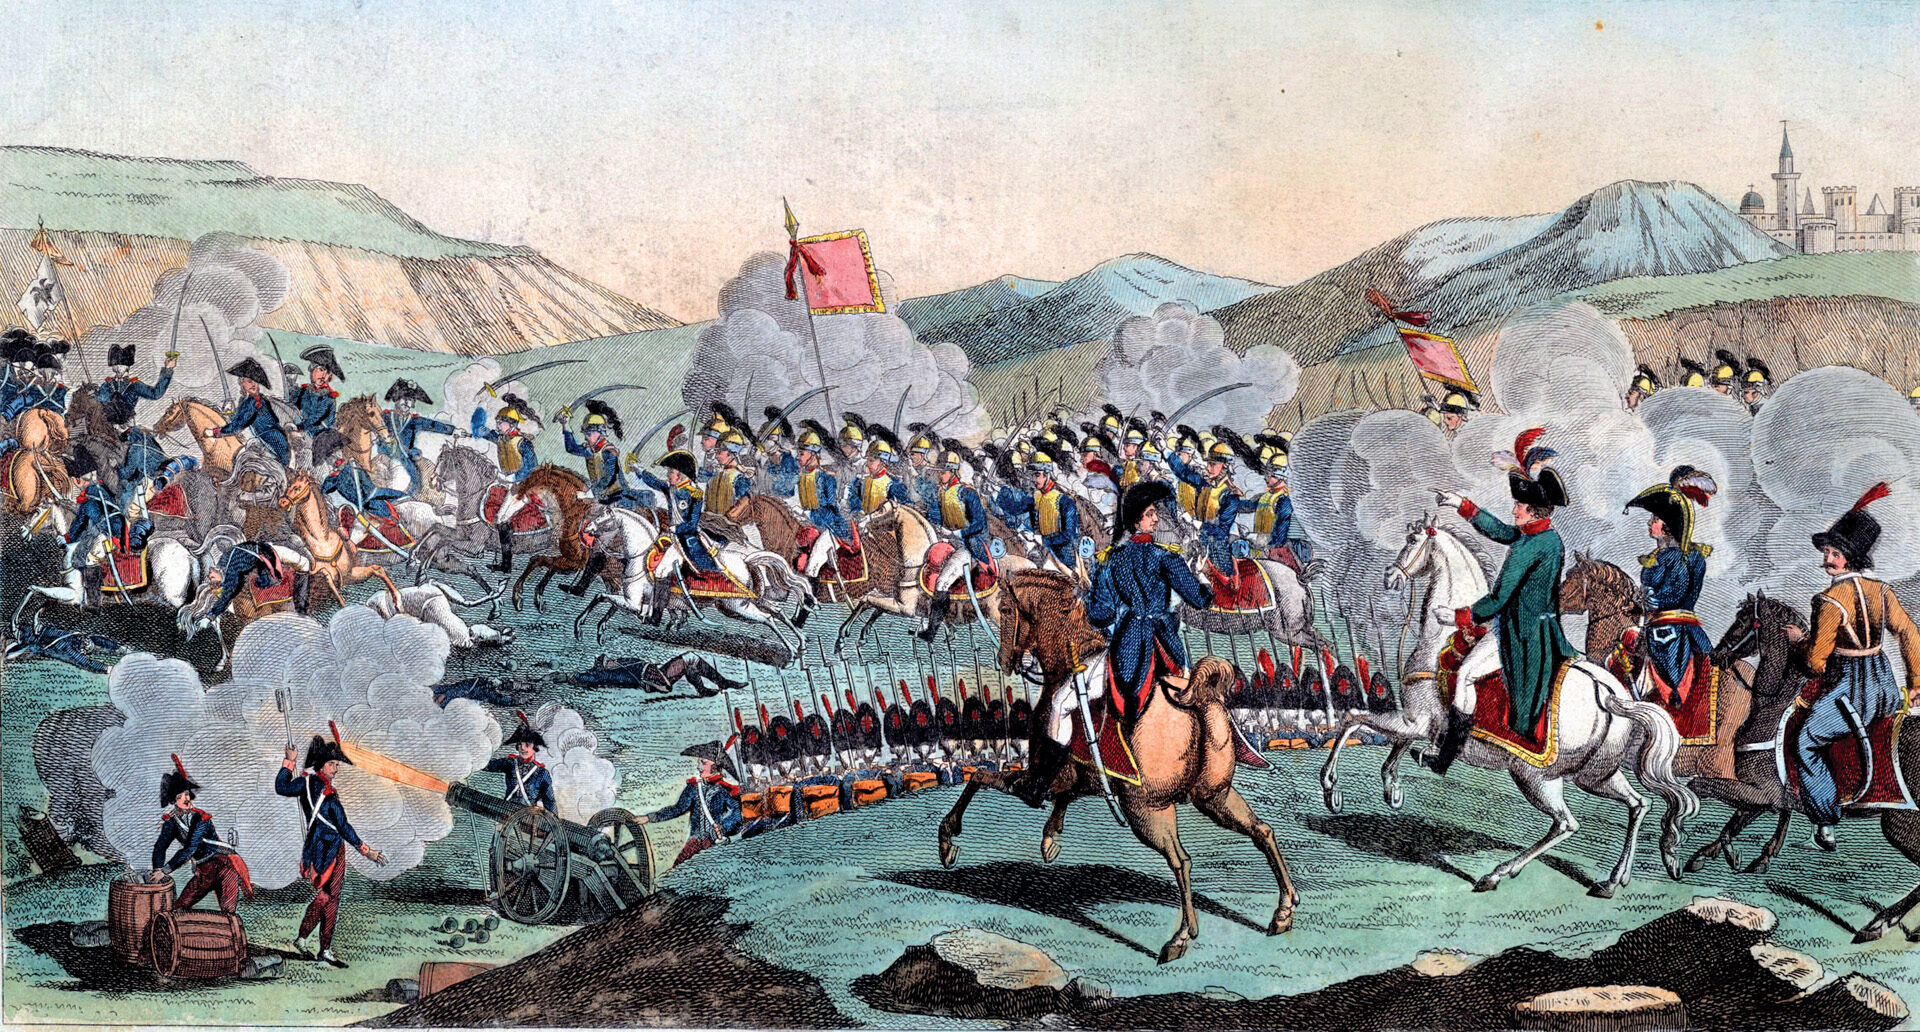 Marshal Michel Ney led a portion of his French VI Corps into action prematurely without orders at Jena. Napoleon is shown directing two cavalry regiments to reinforce his impetuous subordinate, whose detachment faced possible destruction.